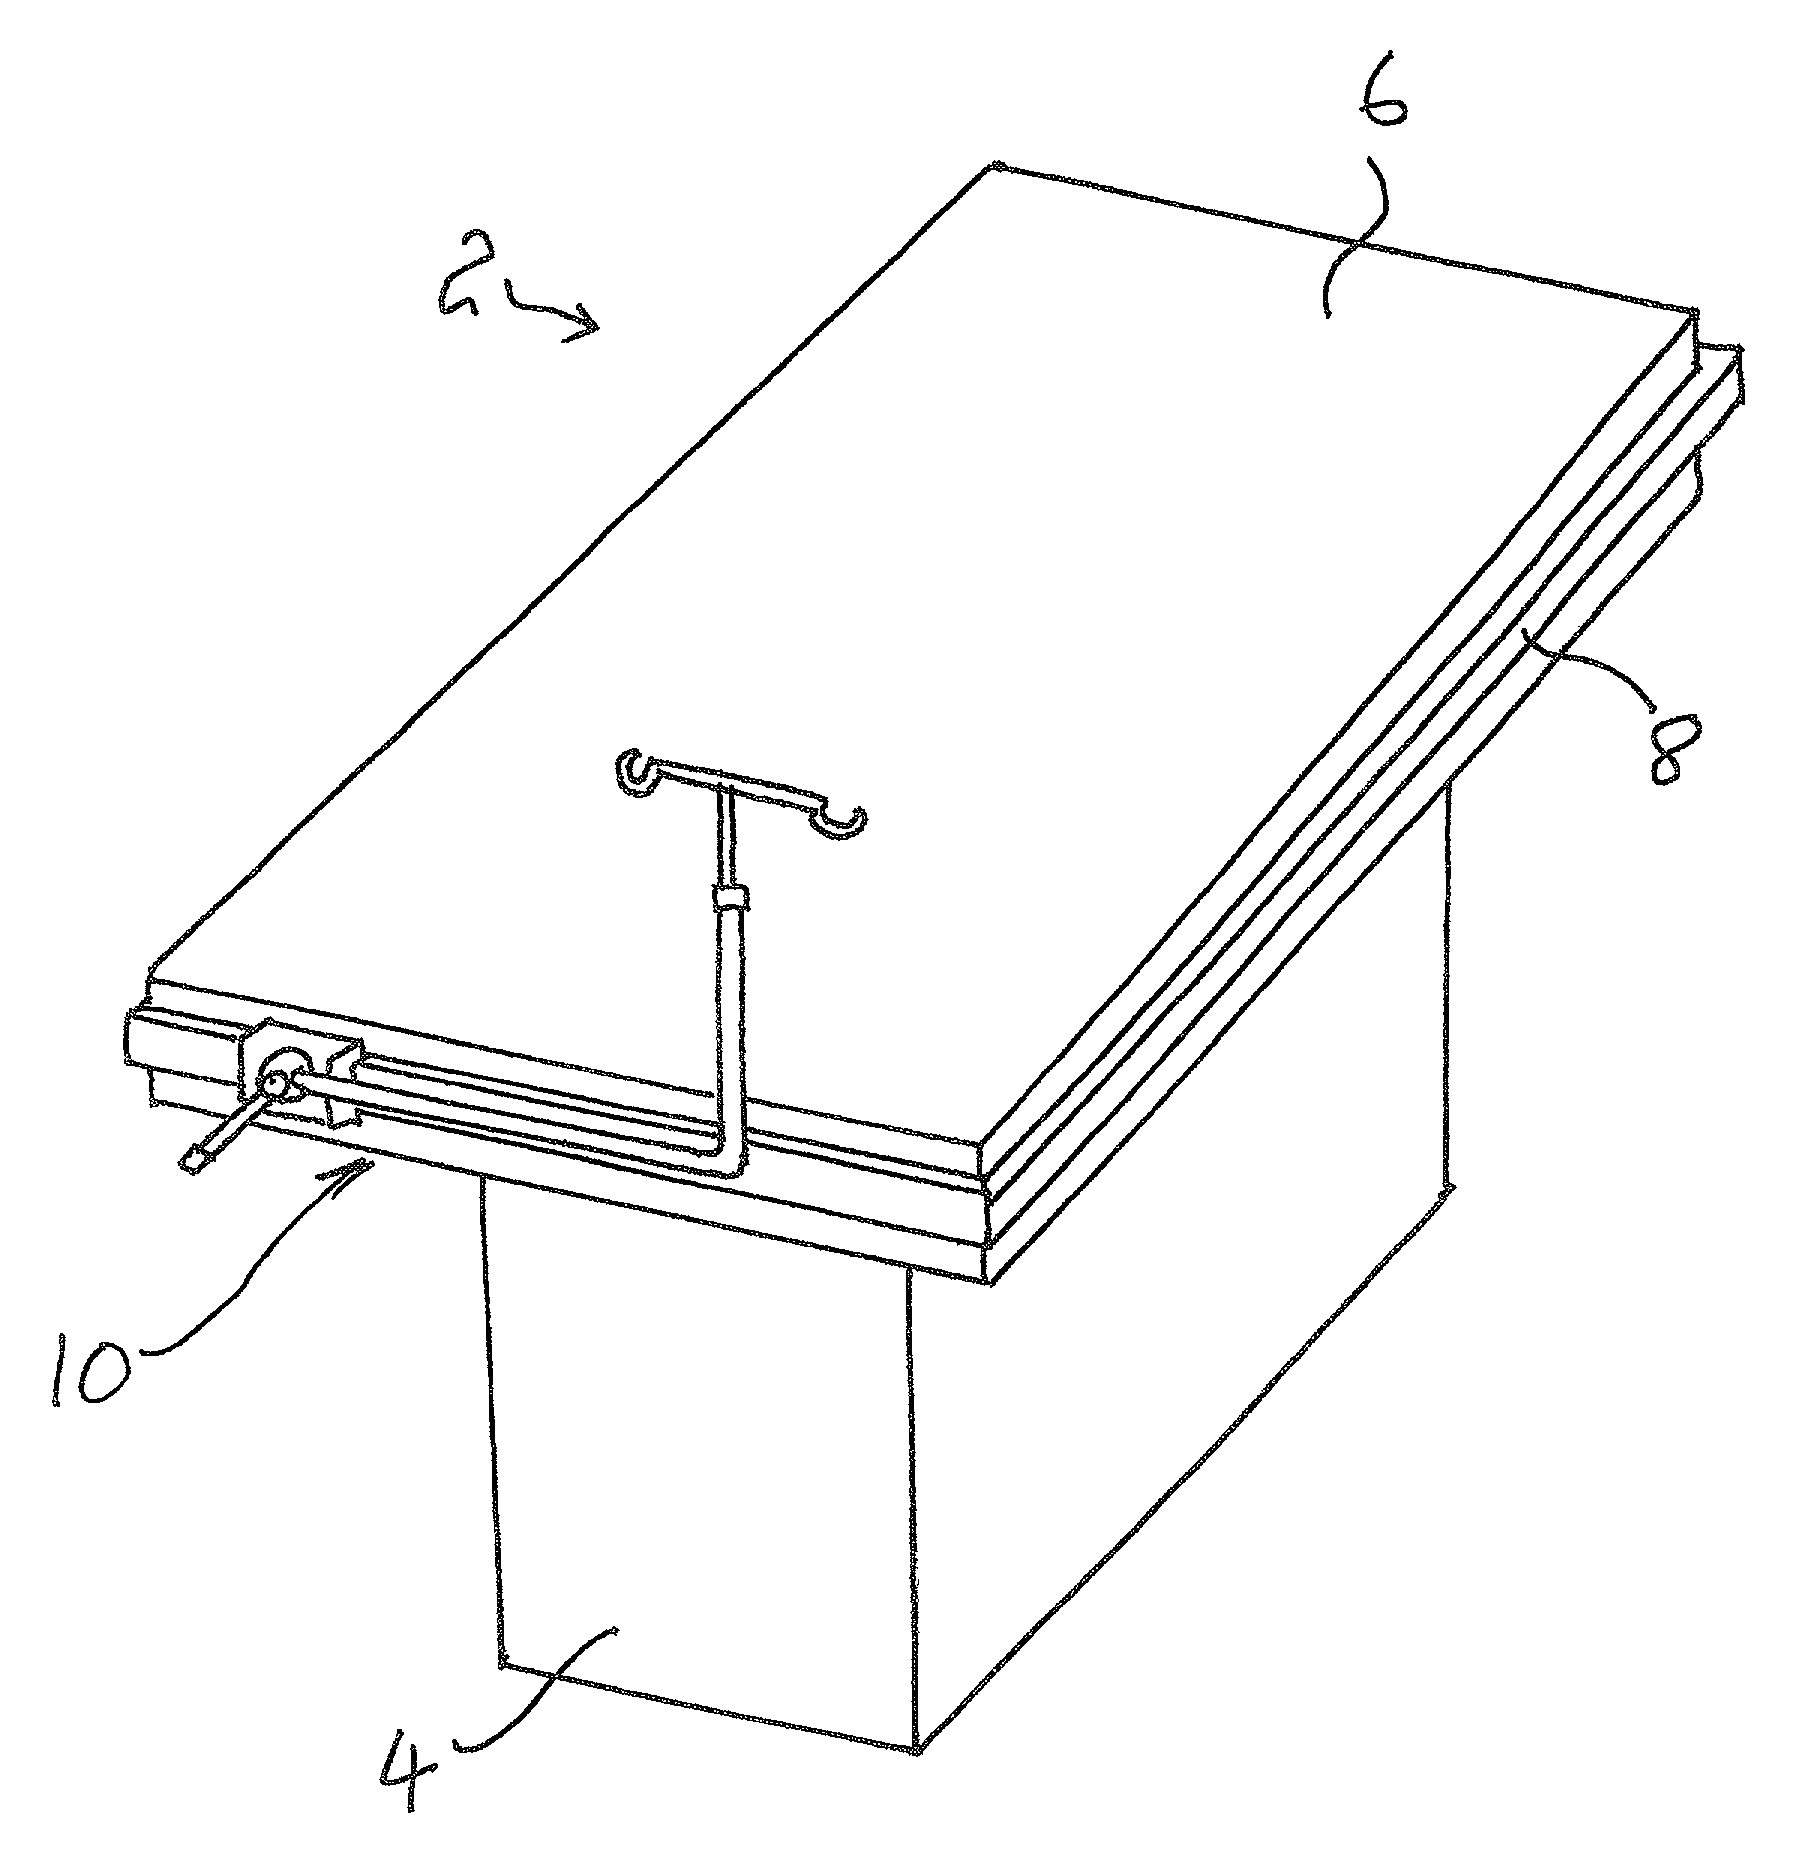 Apparatus for supporting medical fluids